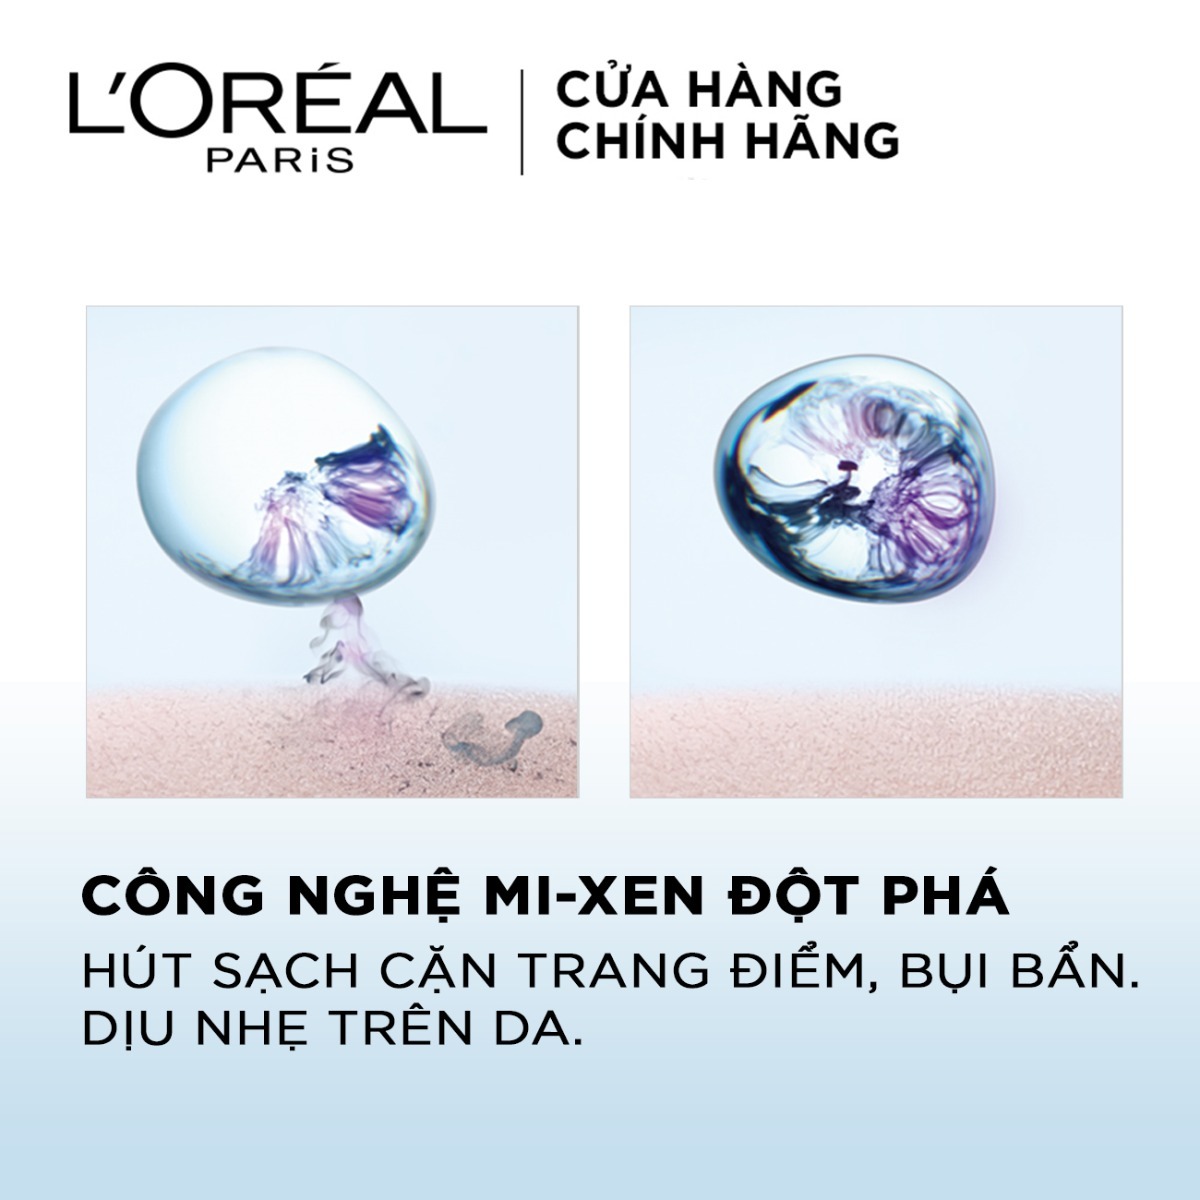 L'Oreal Micellar Water 3-in-1 Refreshing Even For Sensitive Skin